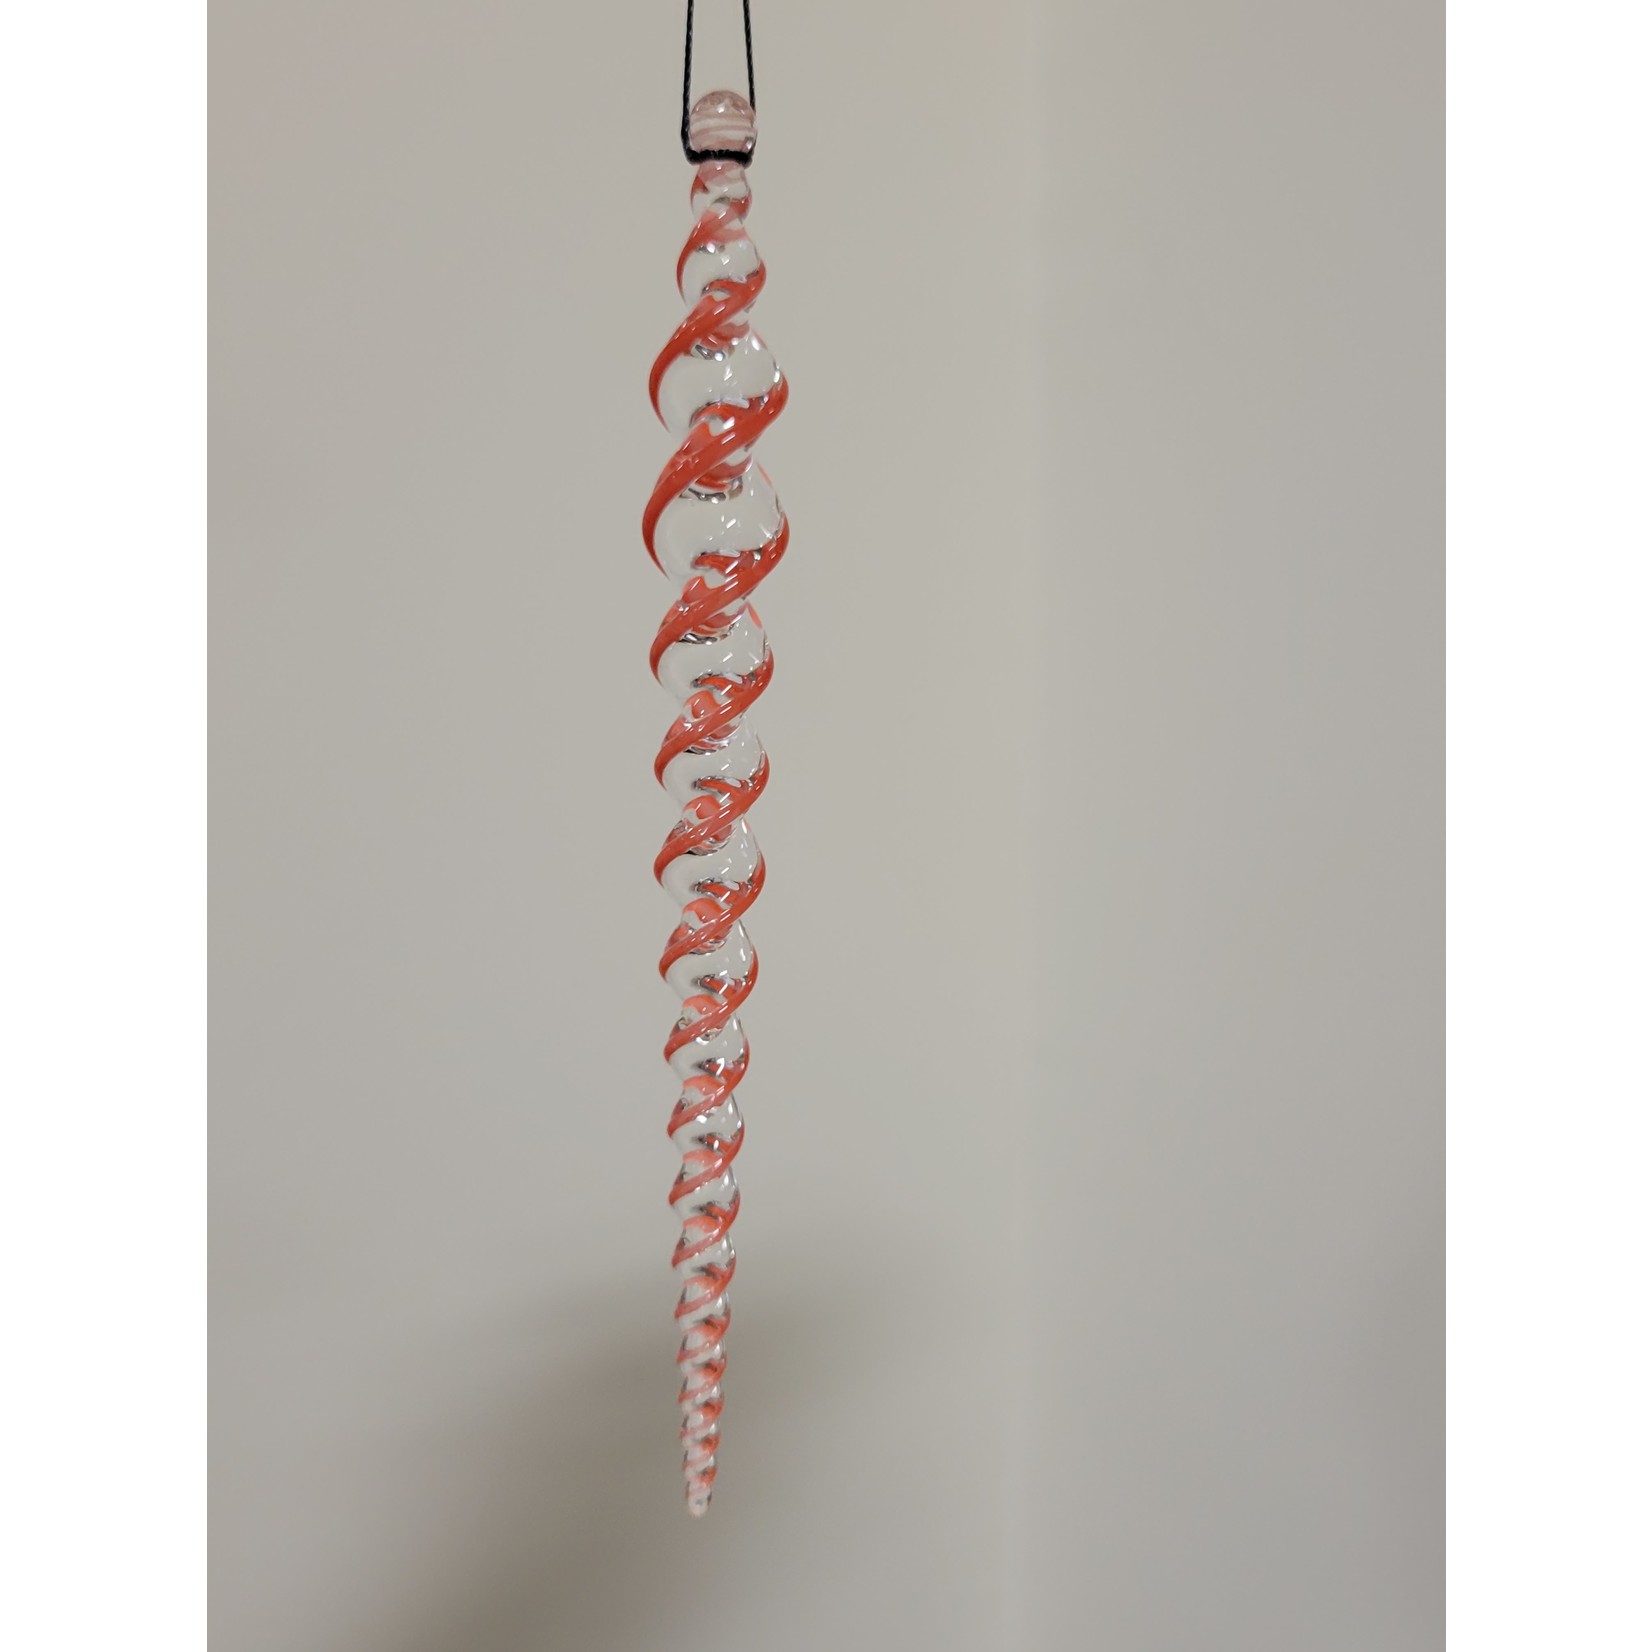 Handcrafted Striped Glass Icicle